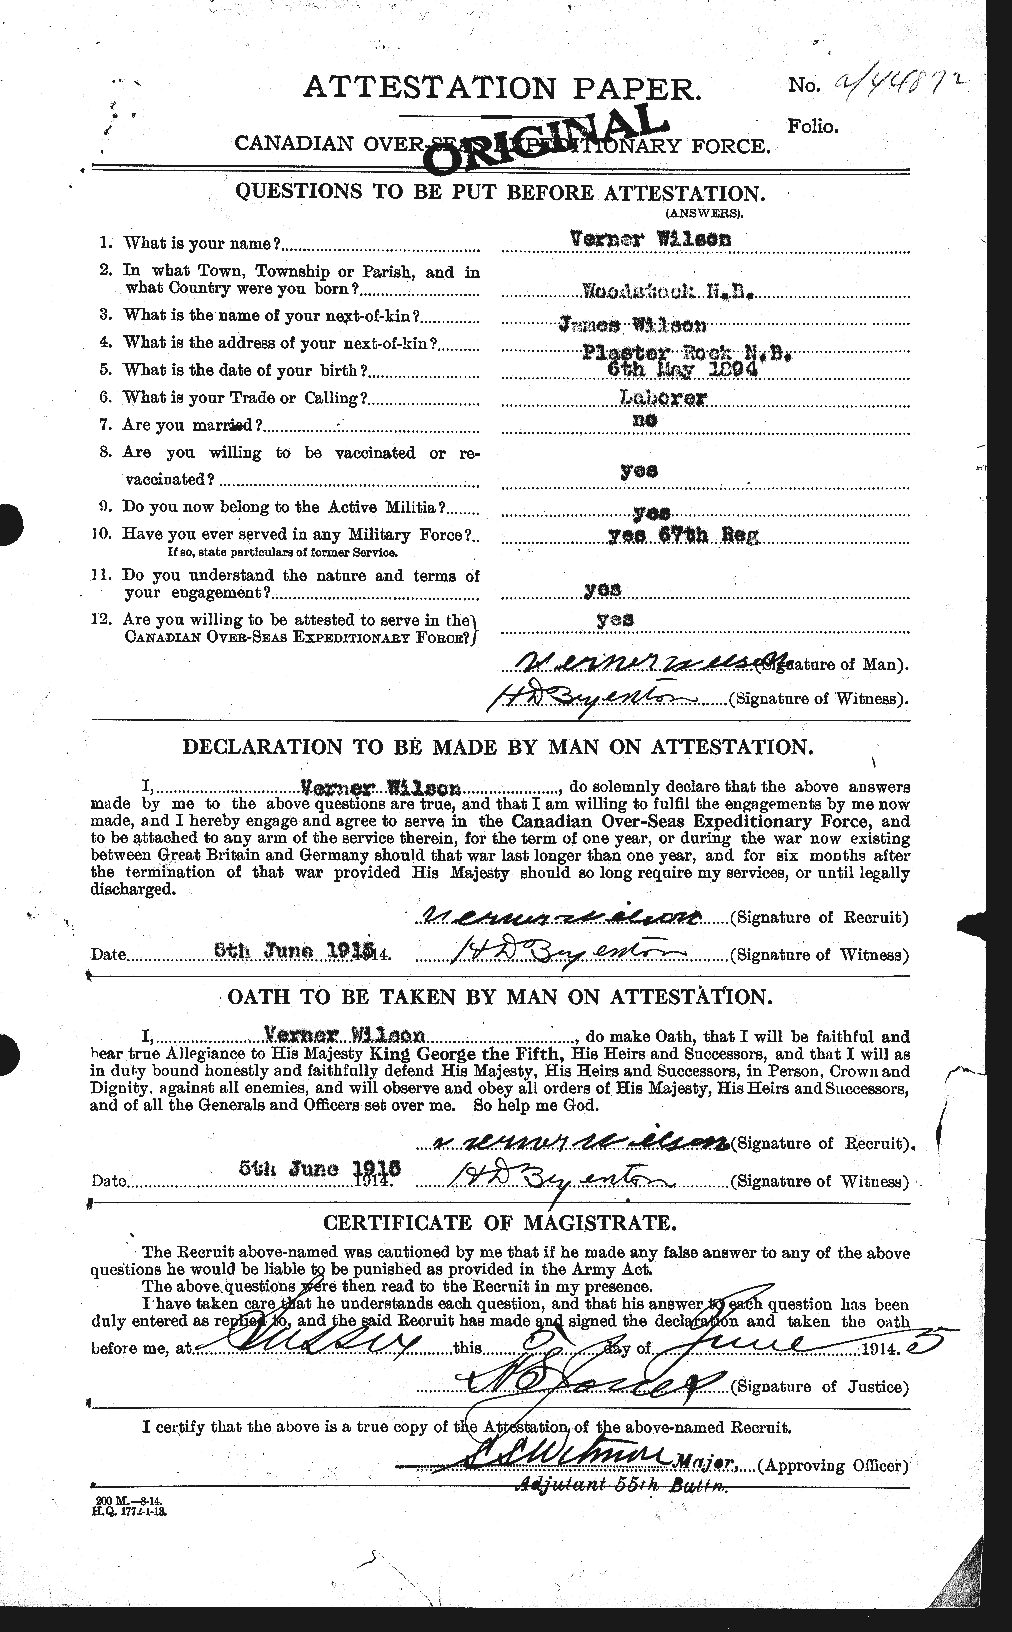 Personnel Records of the First World War - CEF 681707a